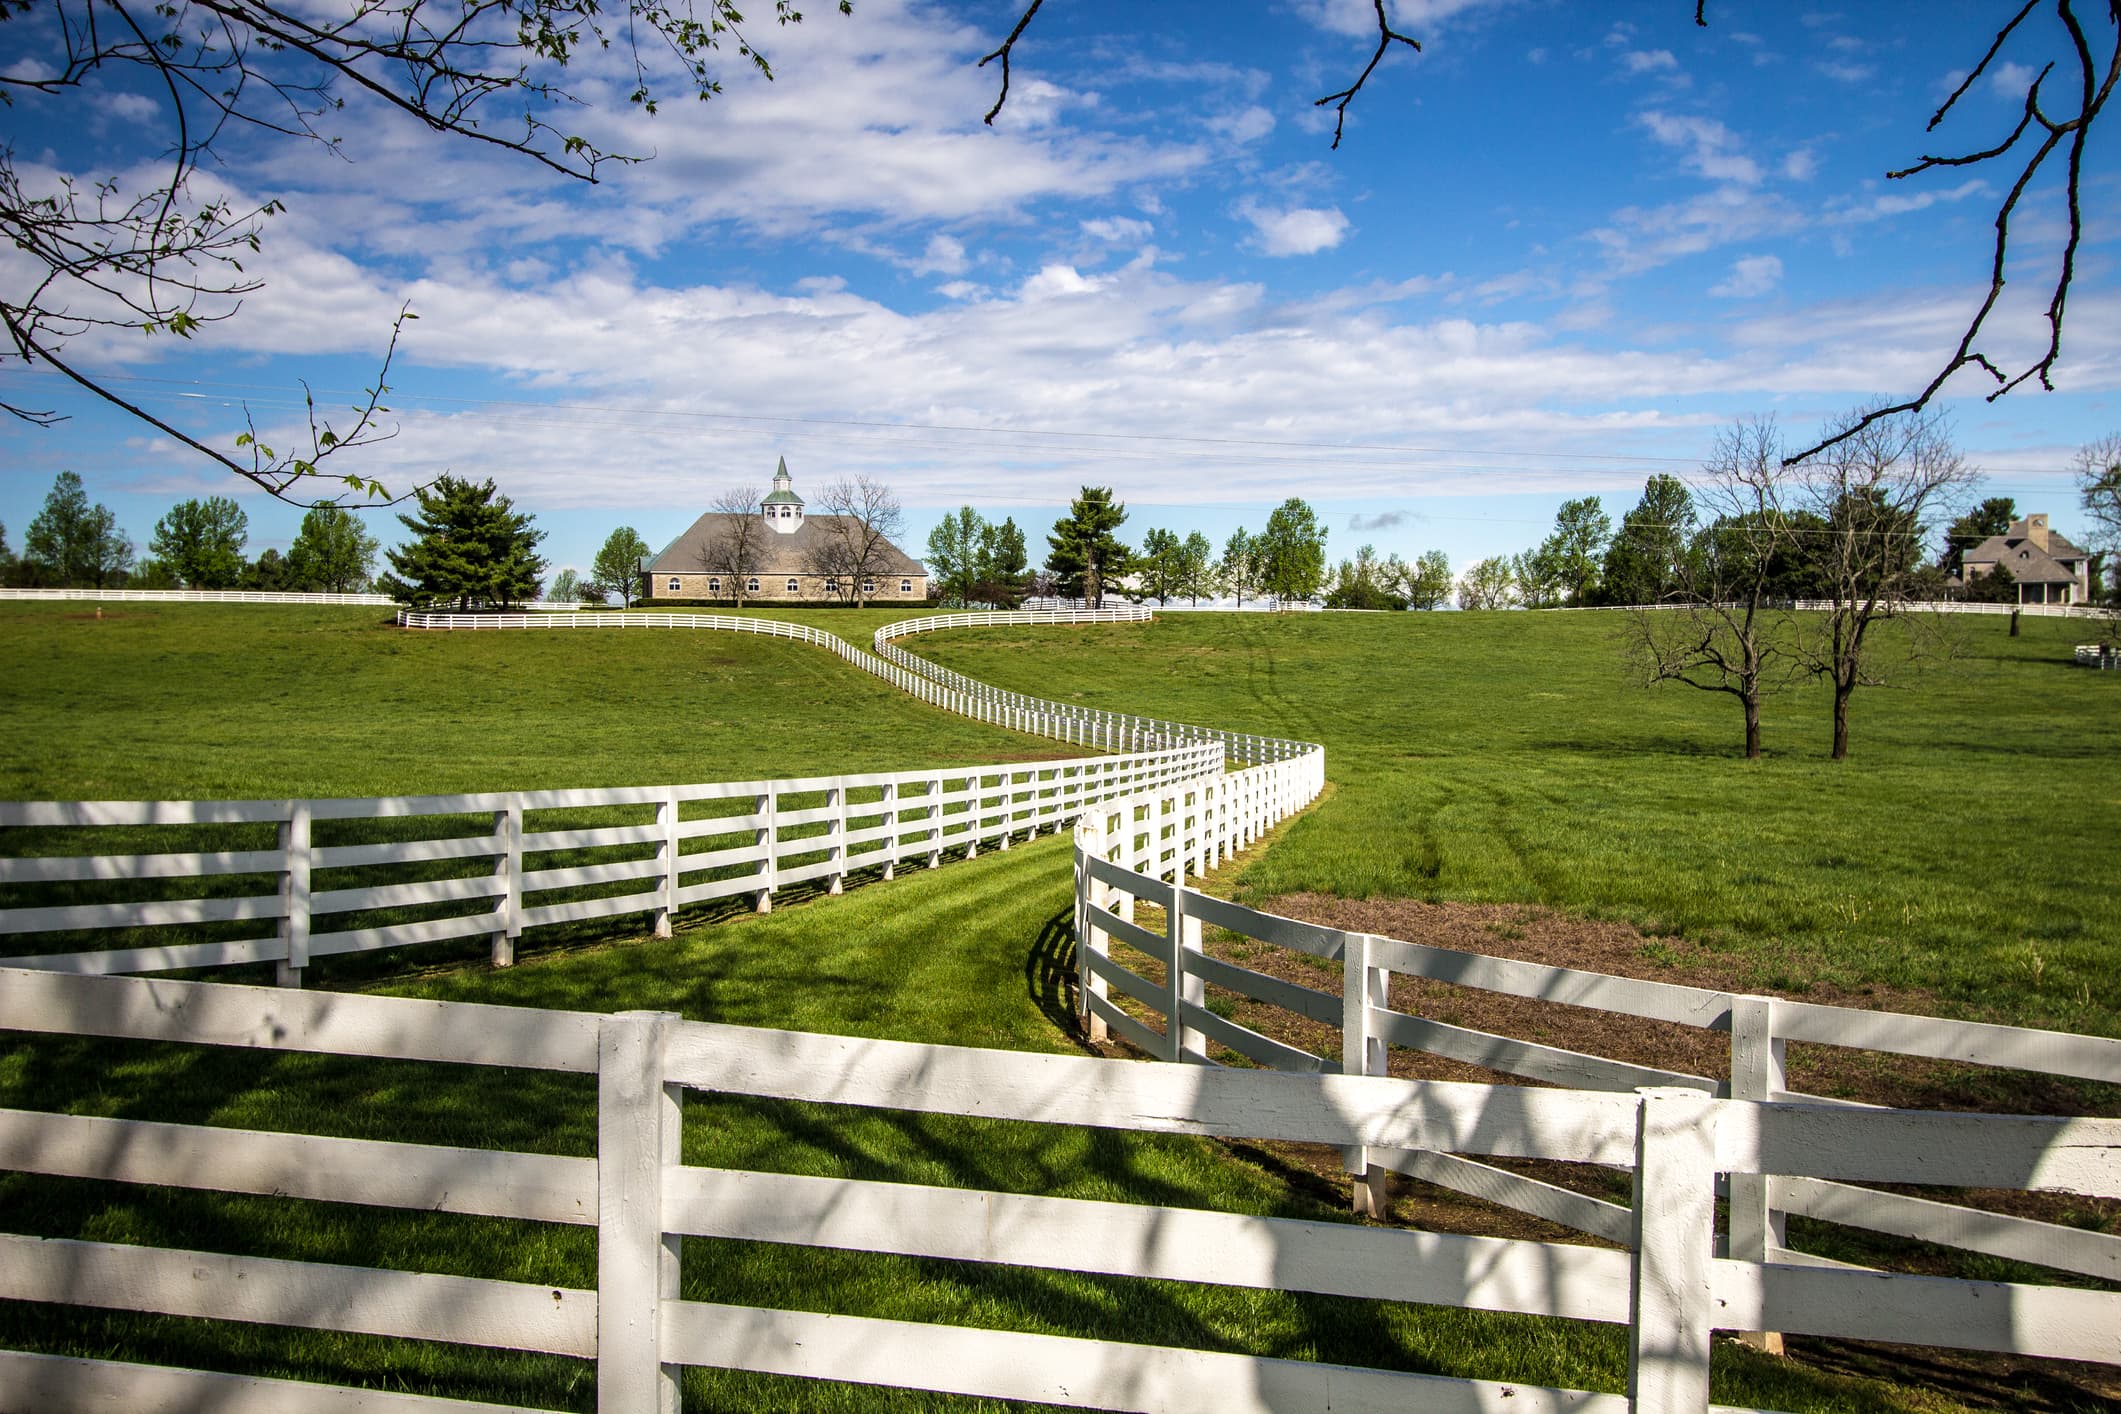 View of a Kentucky Horse Farm with charming white fences.